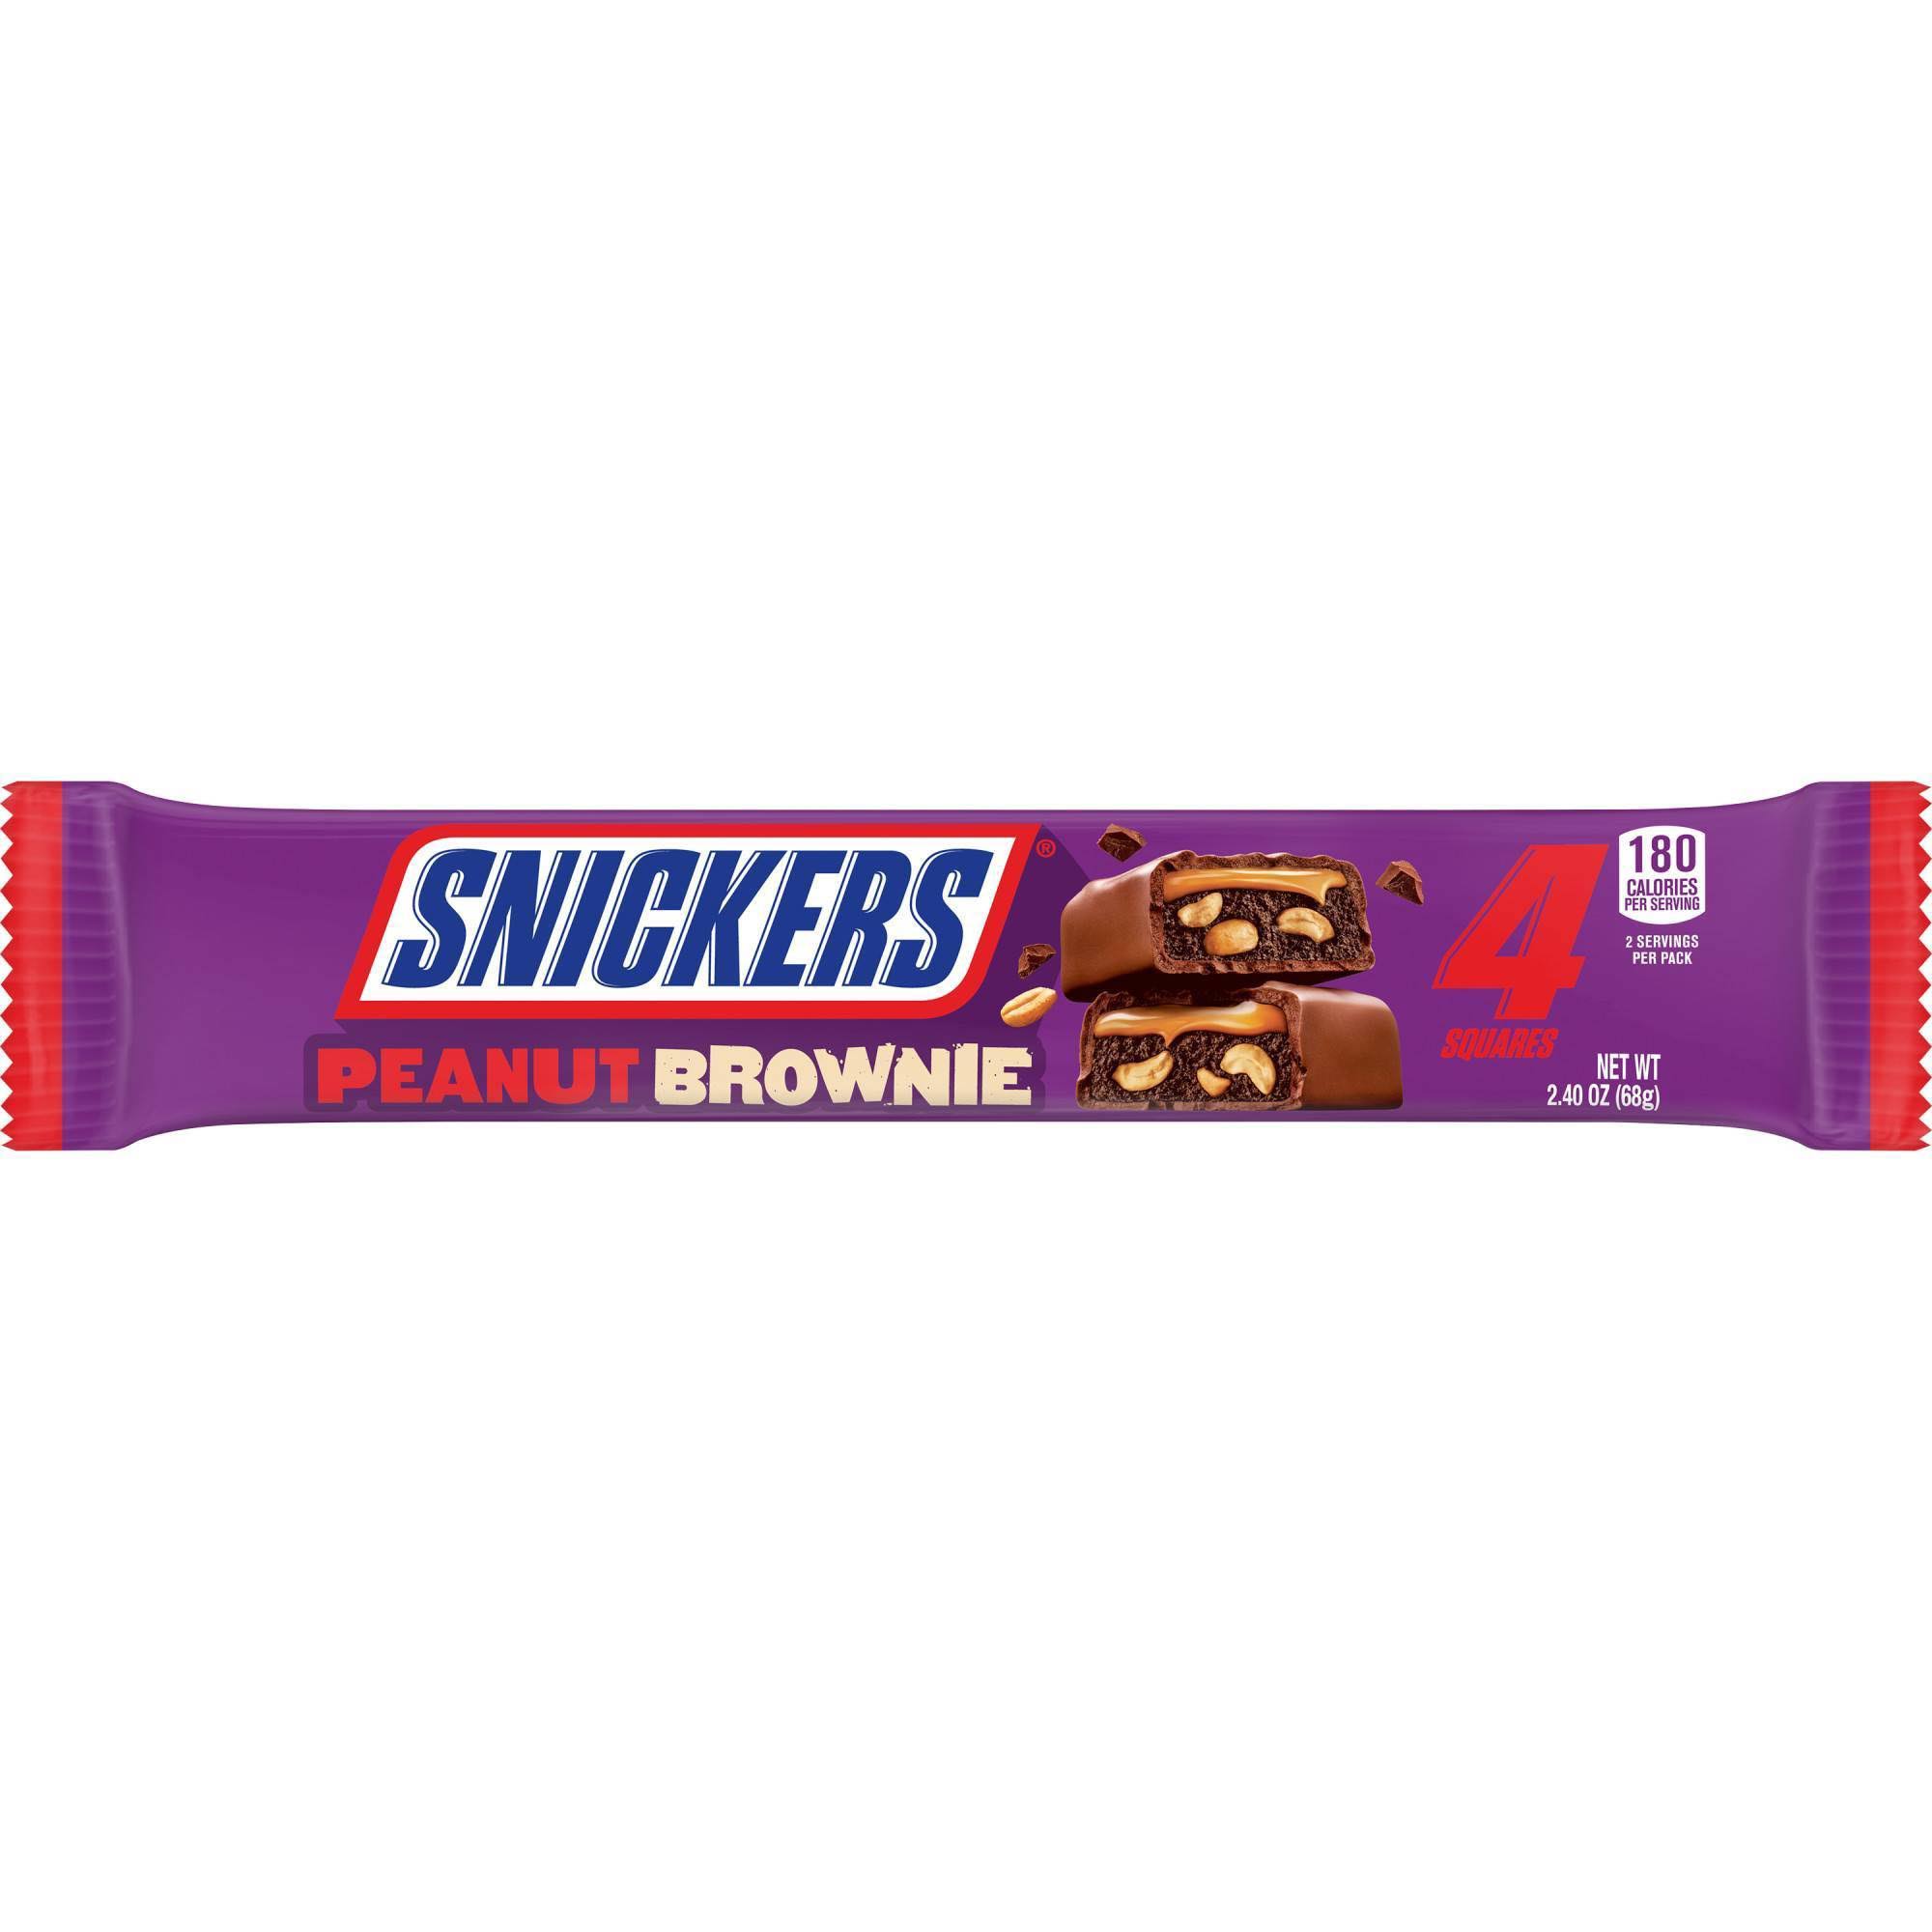 Snickers Peanut Brownie King Size 68g